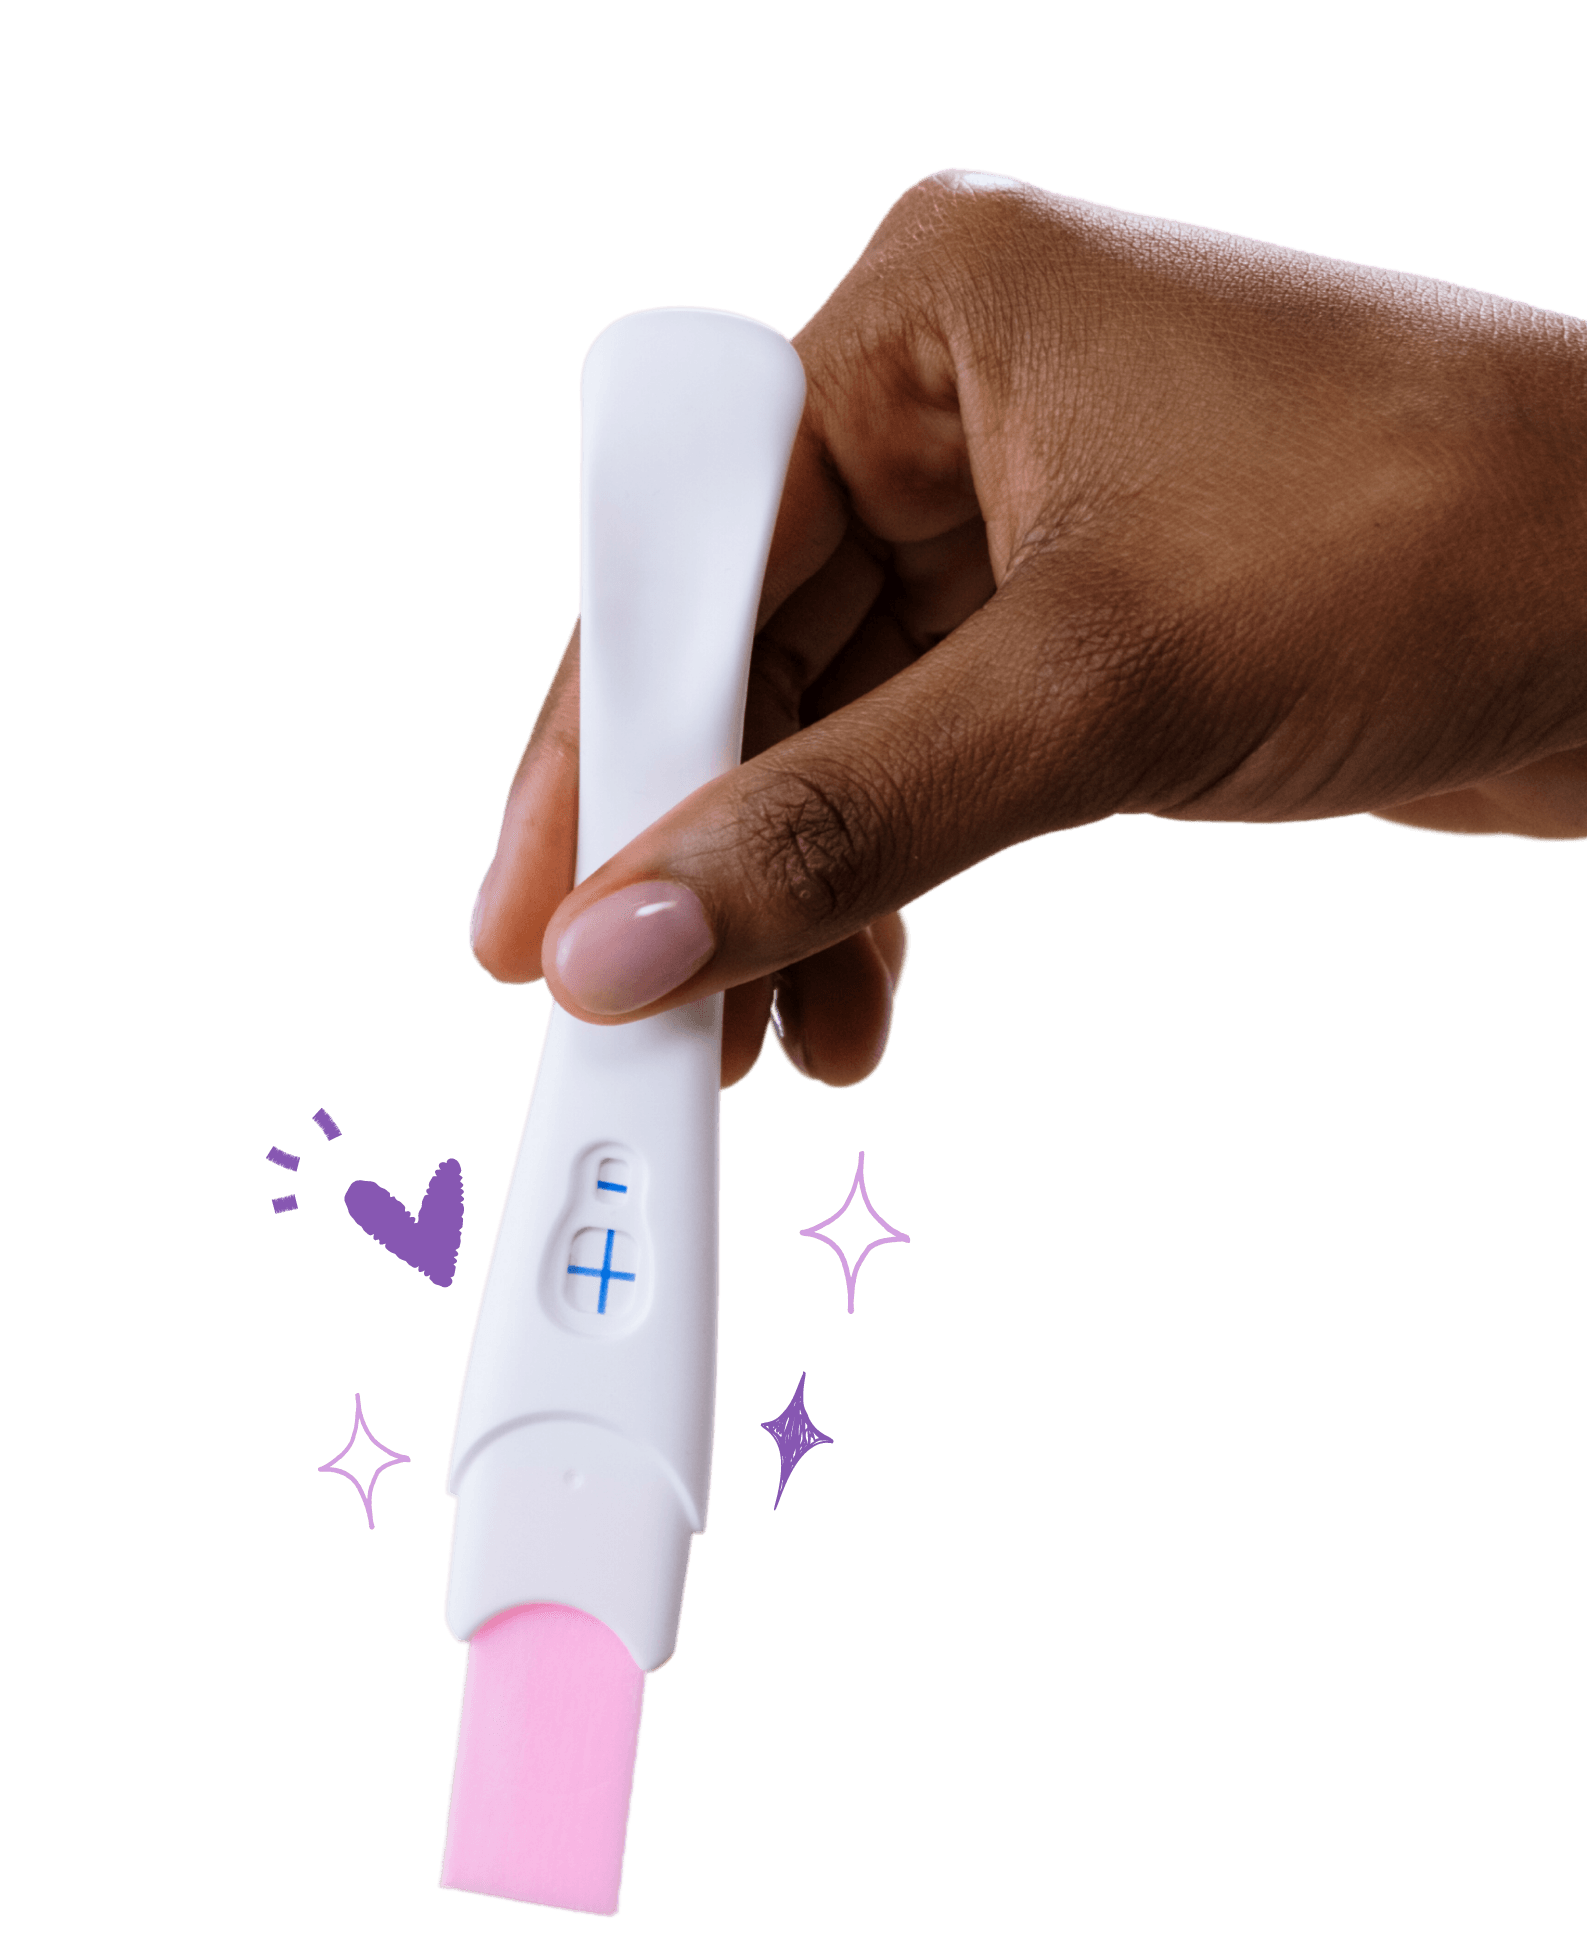 A pregnancy test wand showing a positive results